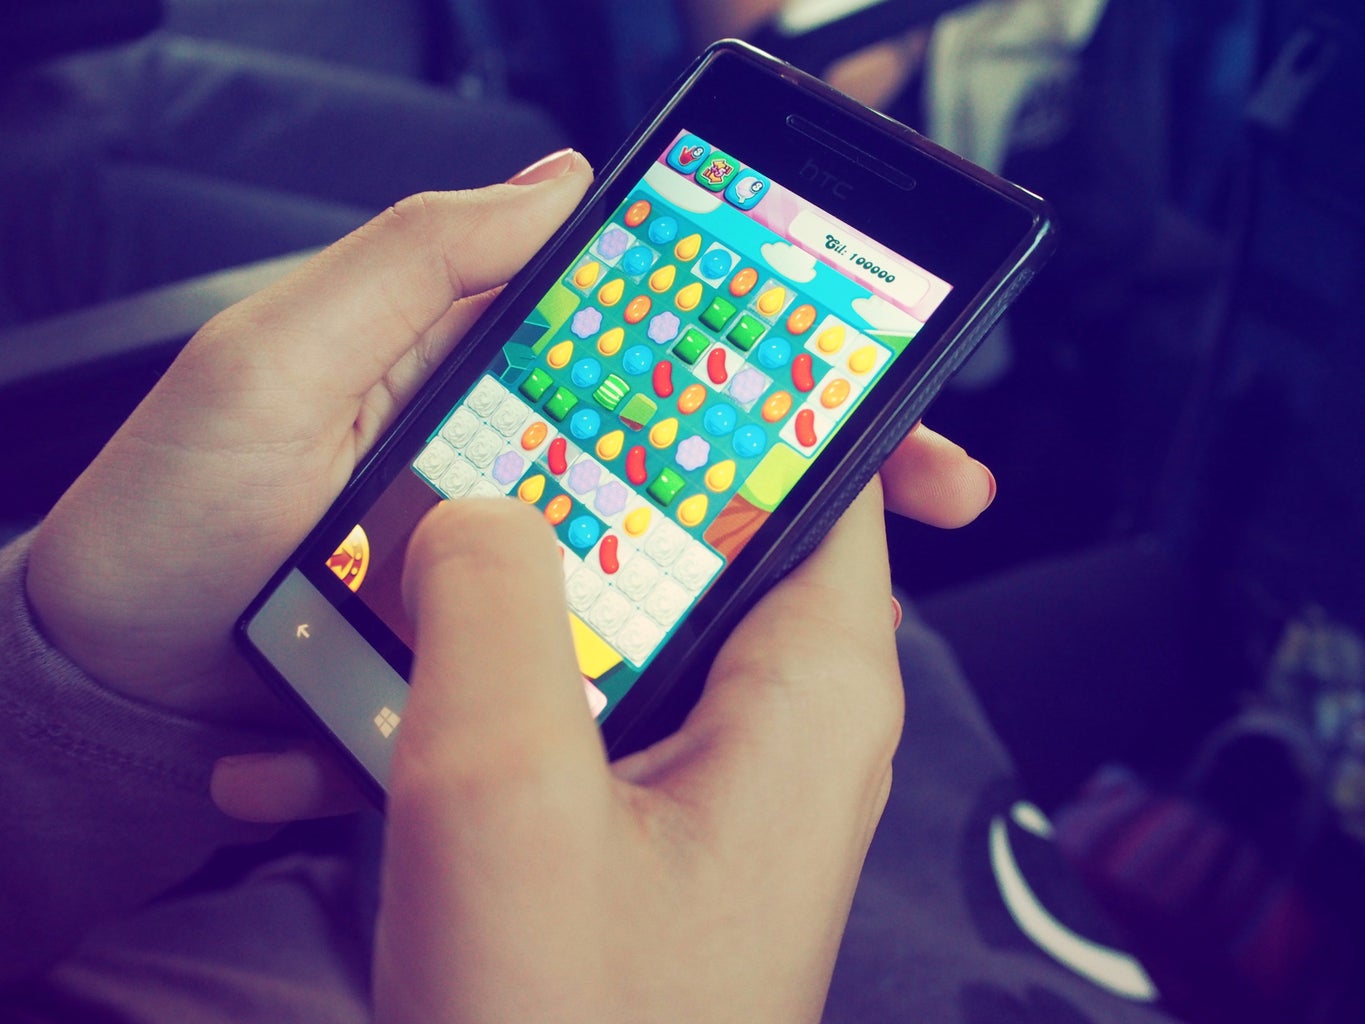 A smartphone user holds their phone, playing a game that looks like Candy Crush